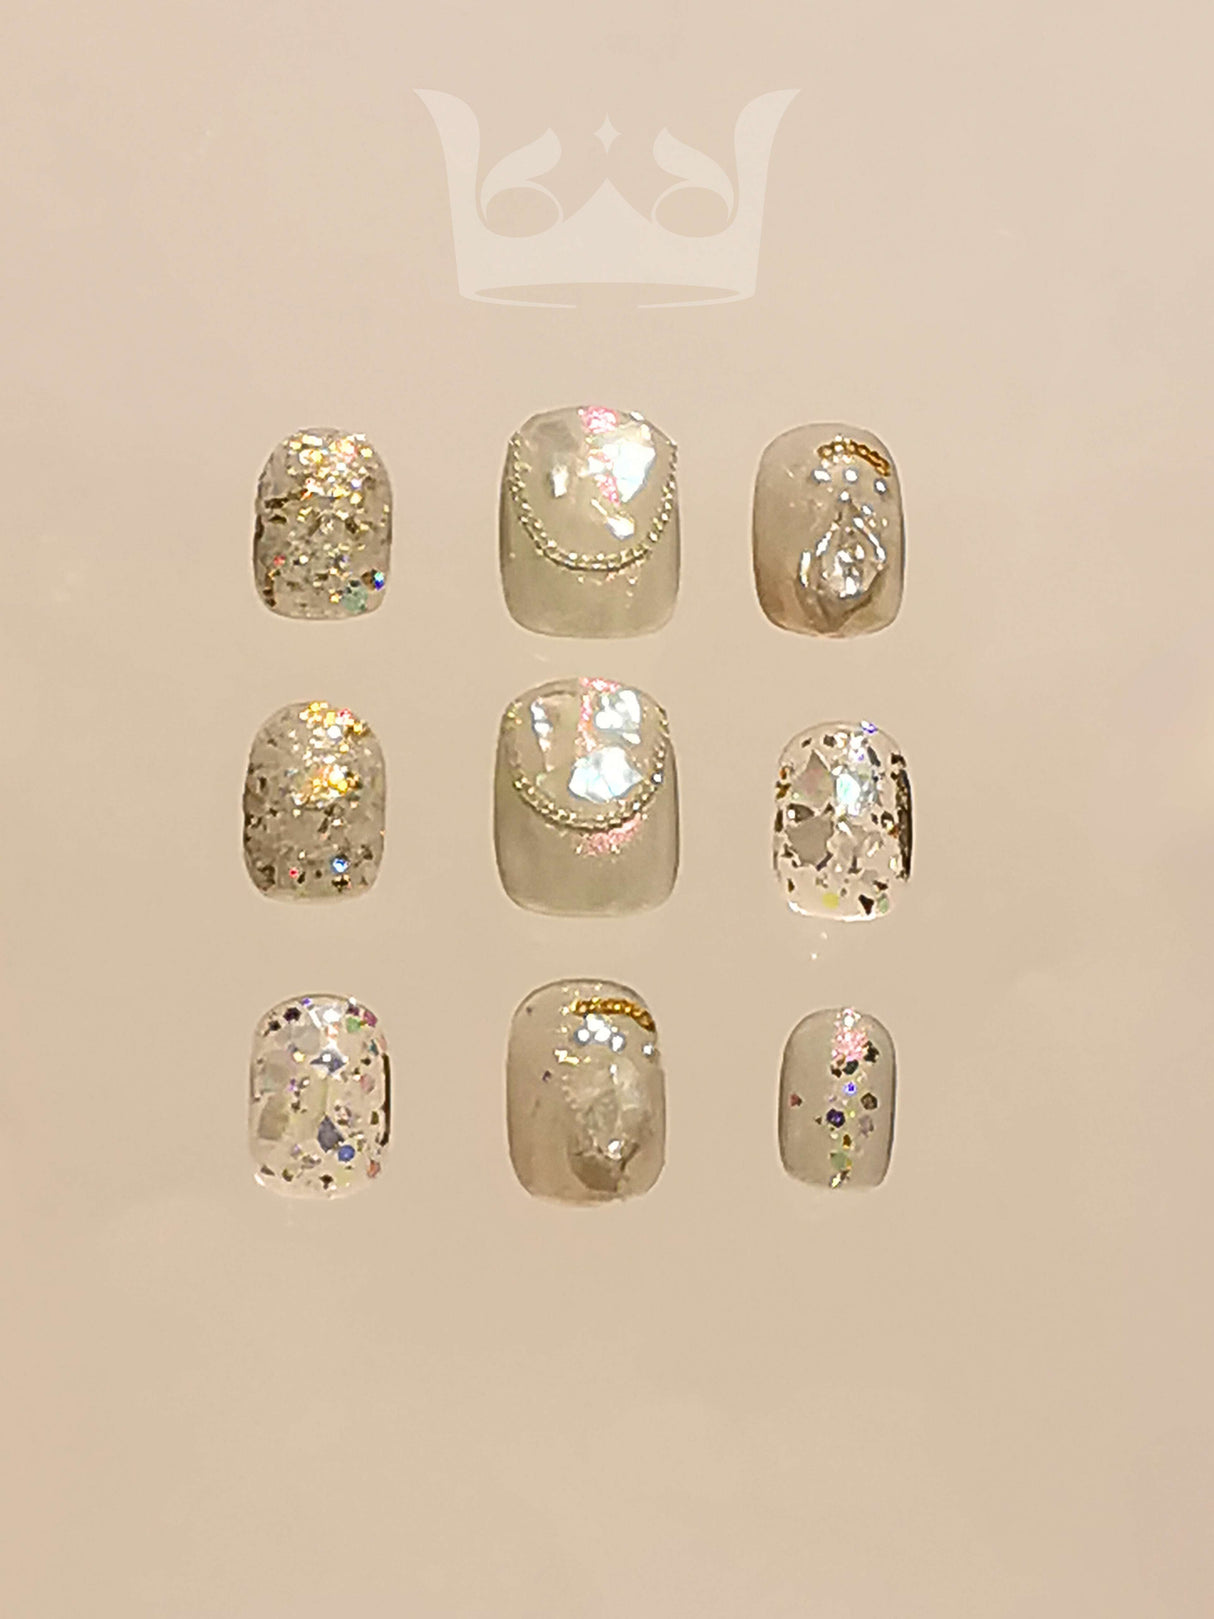 These press-on nails have a sparkly and glamorous design featuring large glitter flakes, rhinestones, sequins, and accent designs. The clear or nude base color adds elegance and extra sparkle.